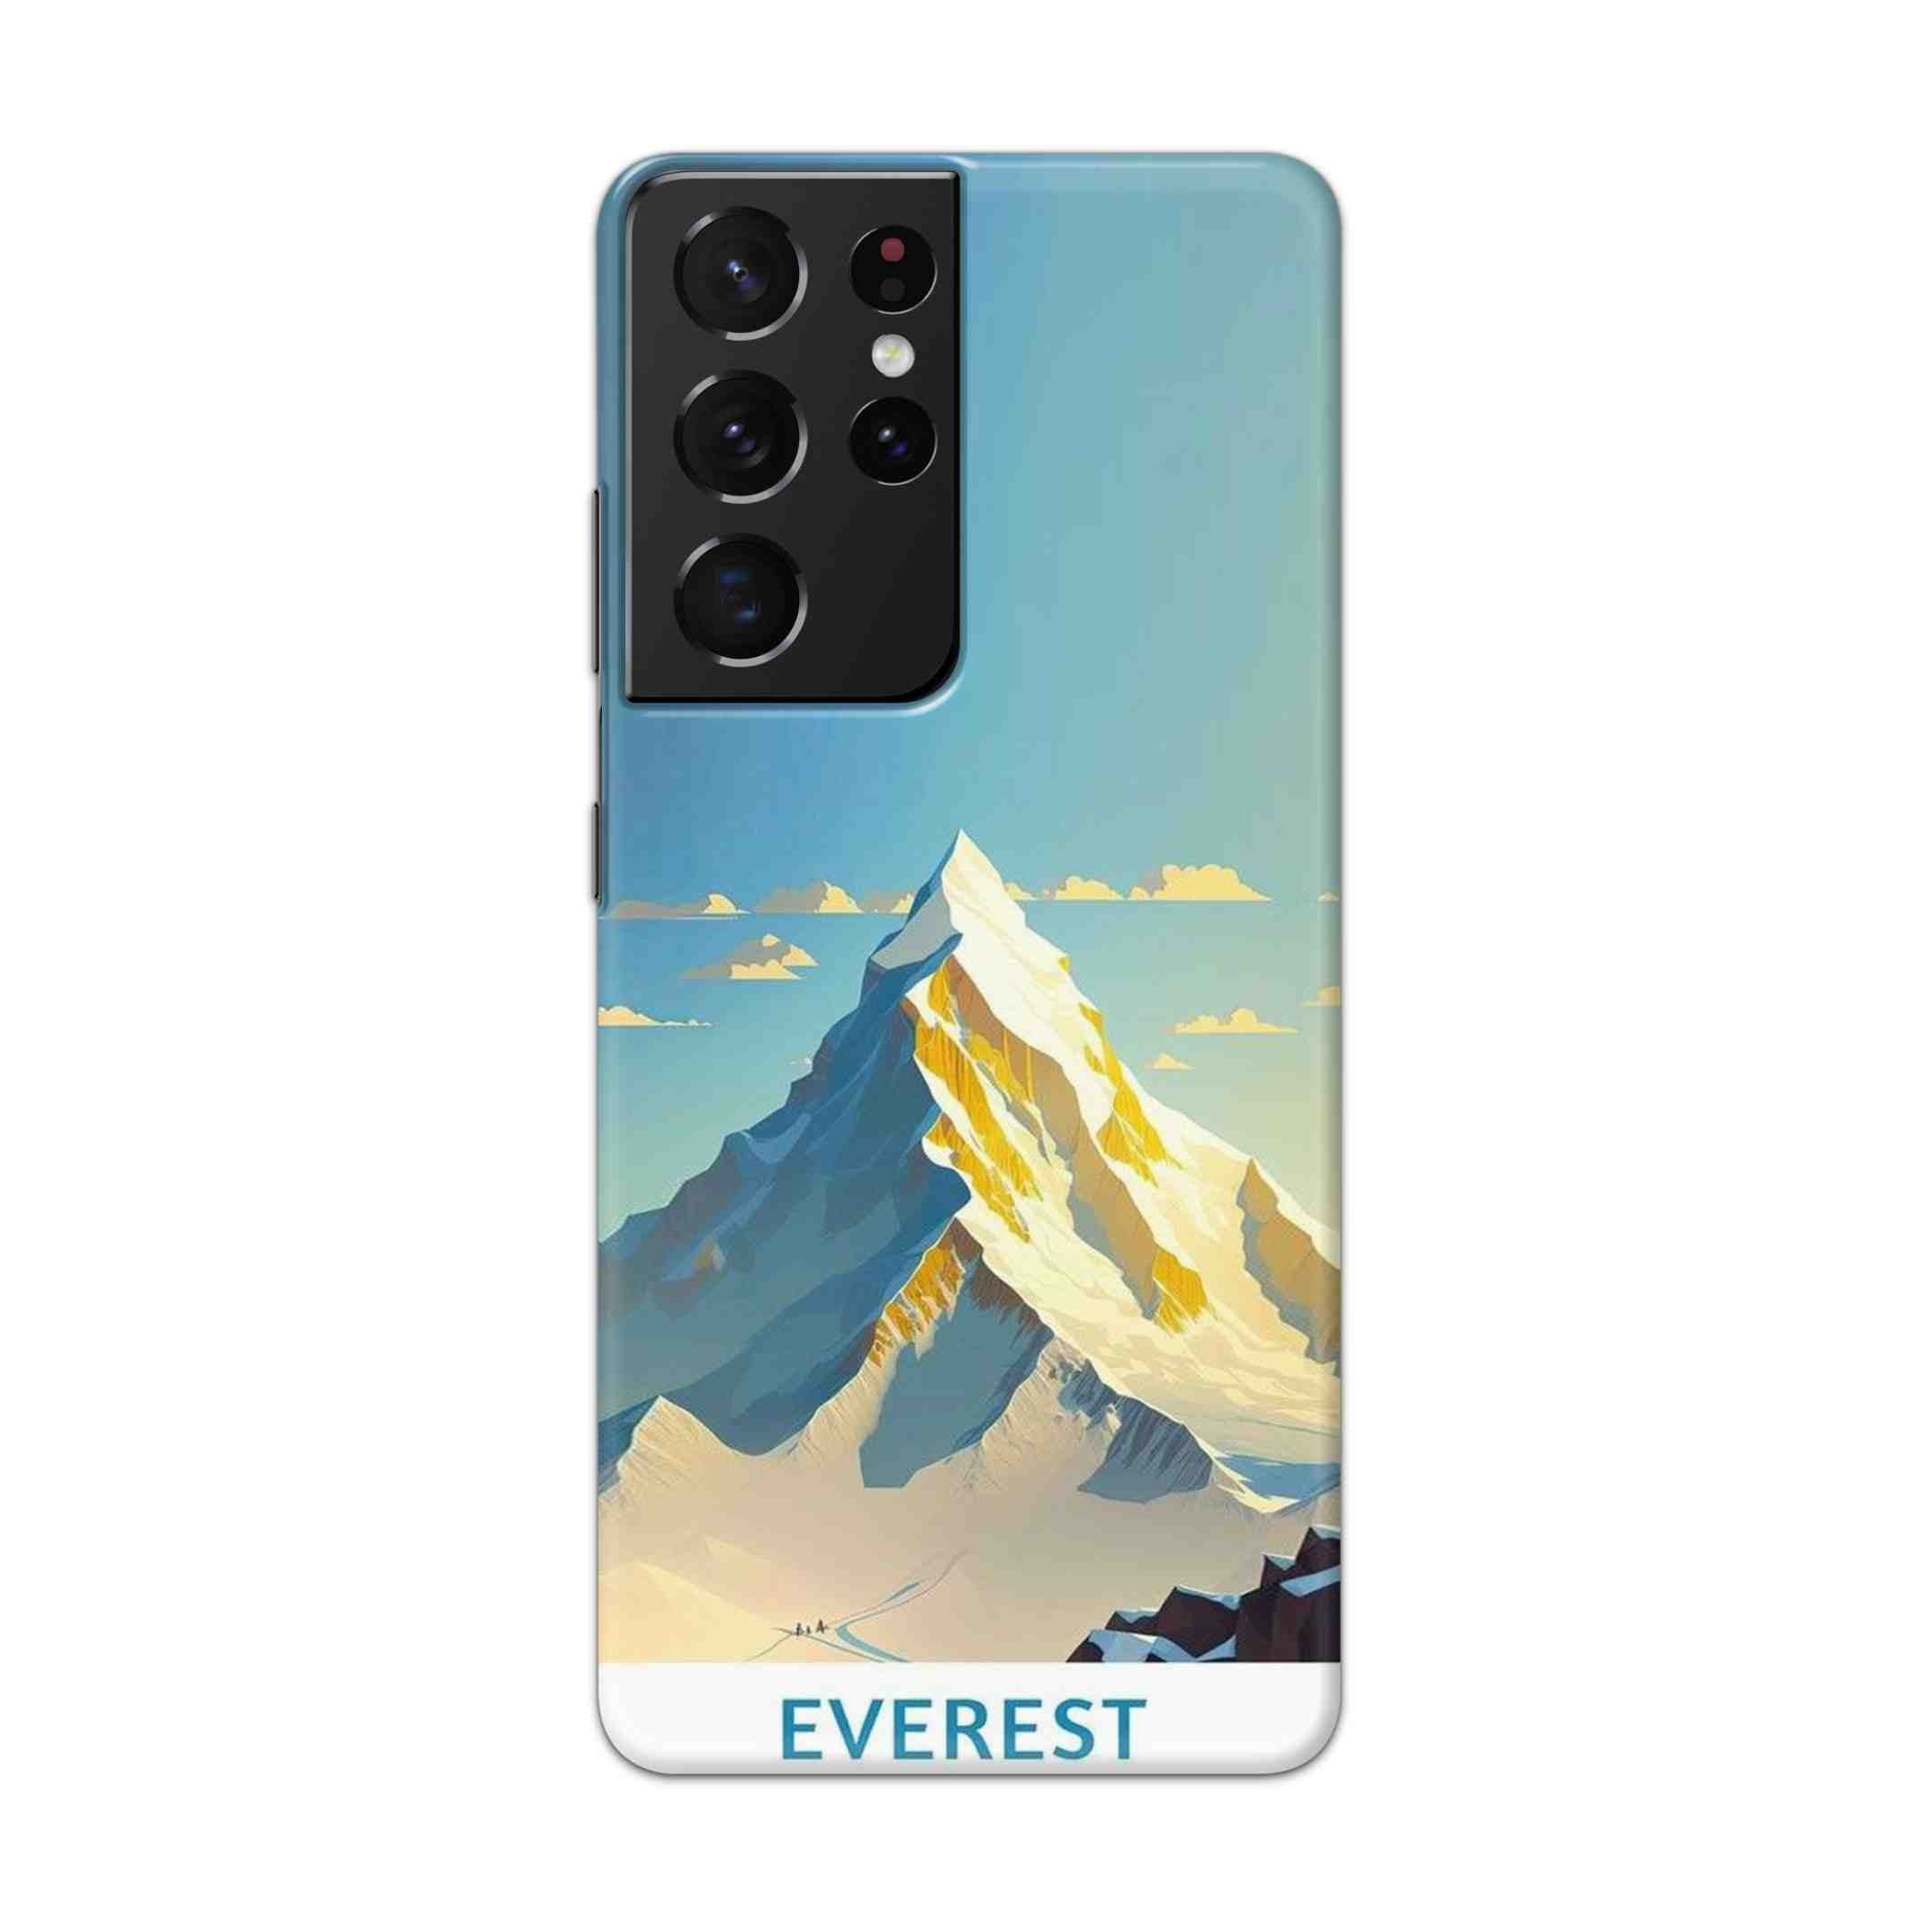 Buy Everest Hard Back Mobile Phone Case Cover For Samsung Galaxy S21 Ultra Online